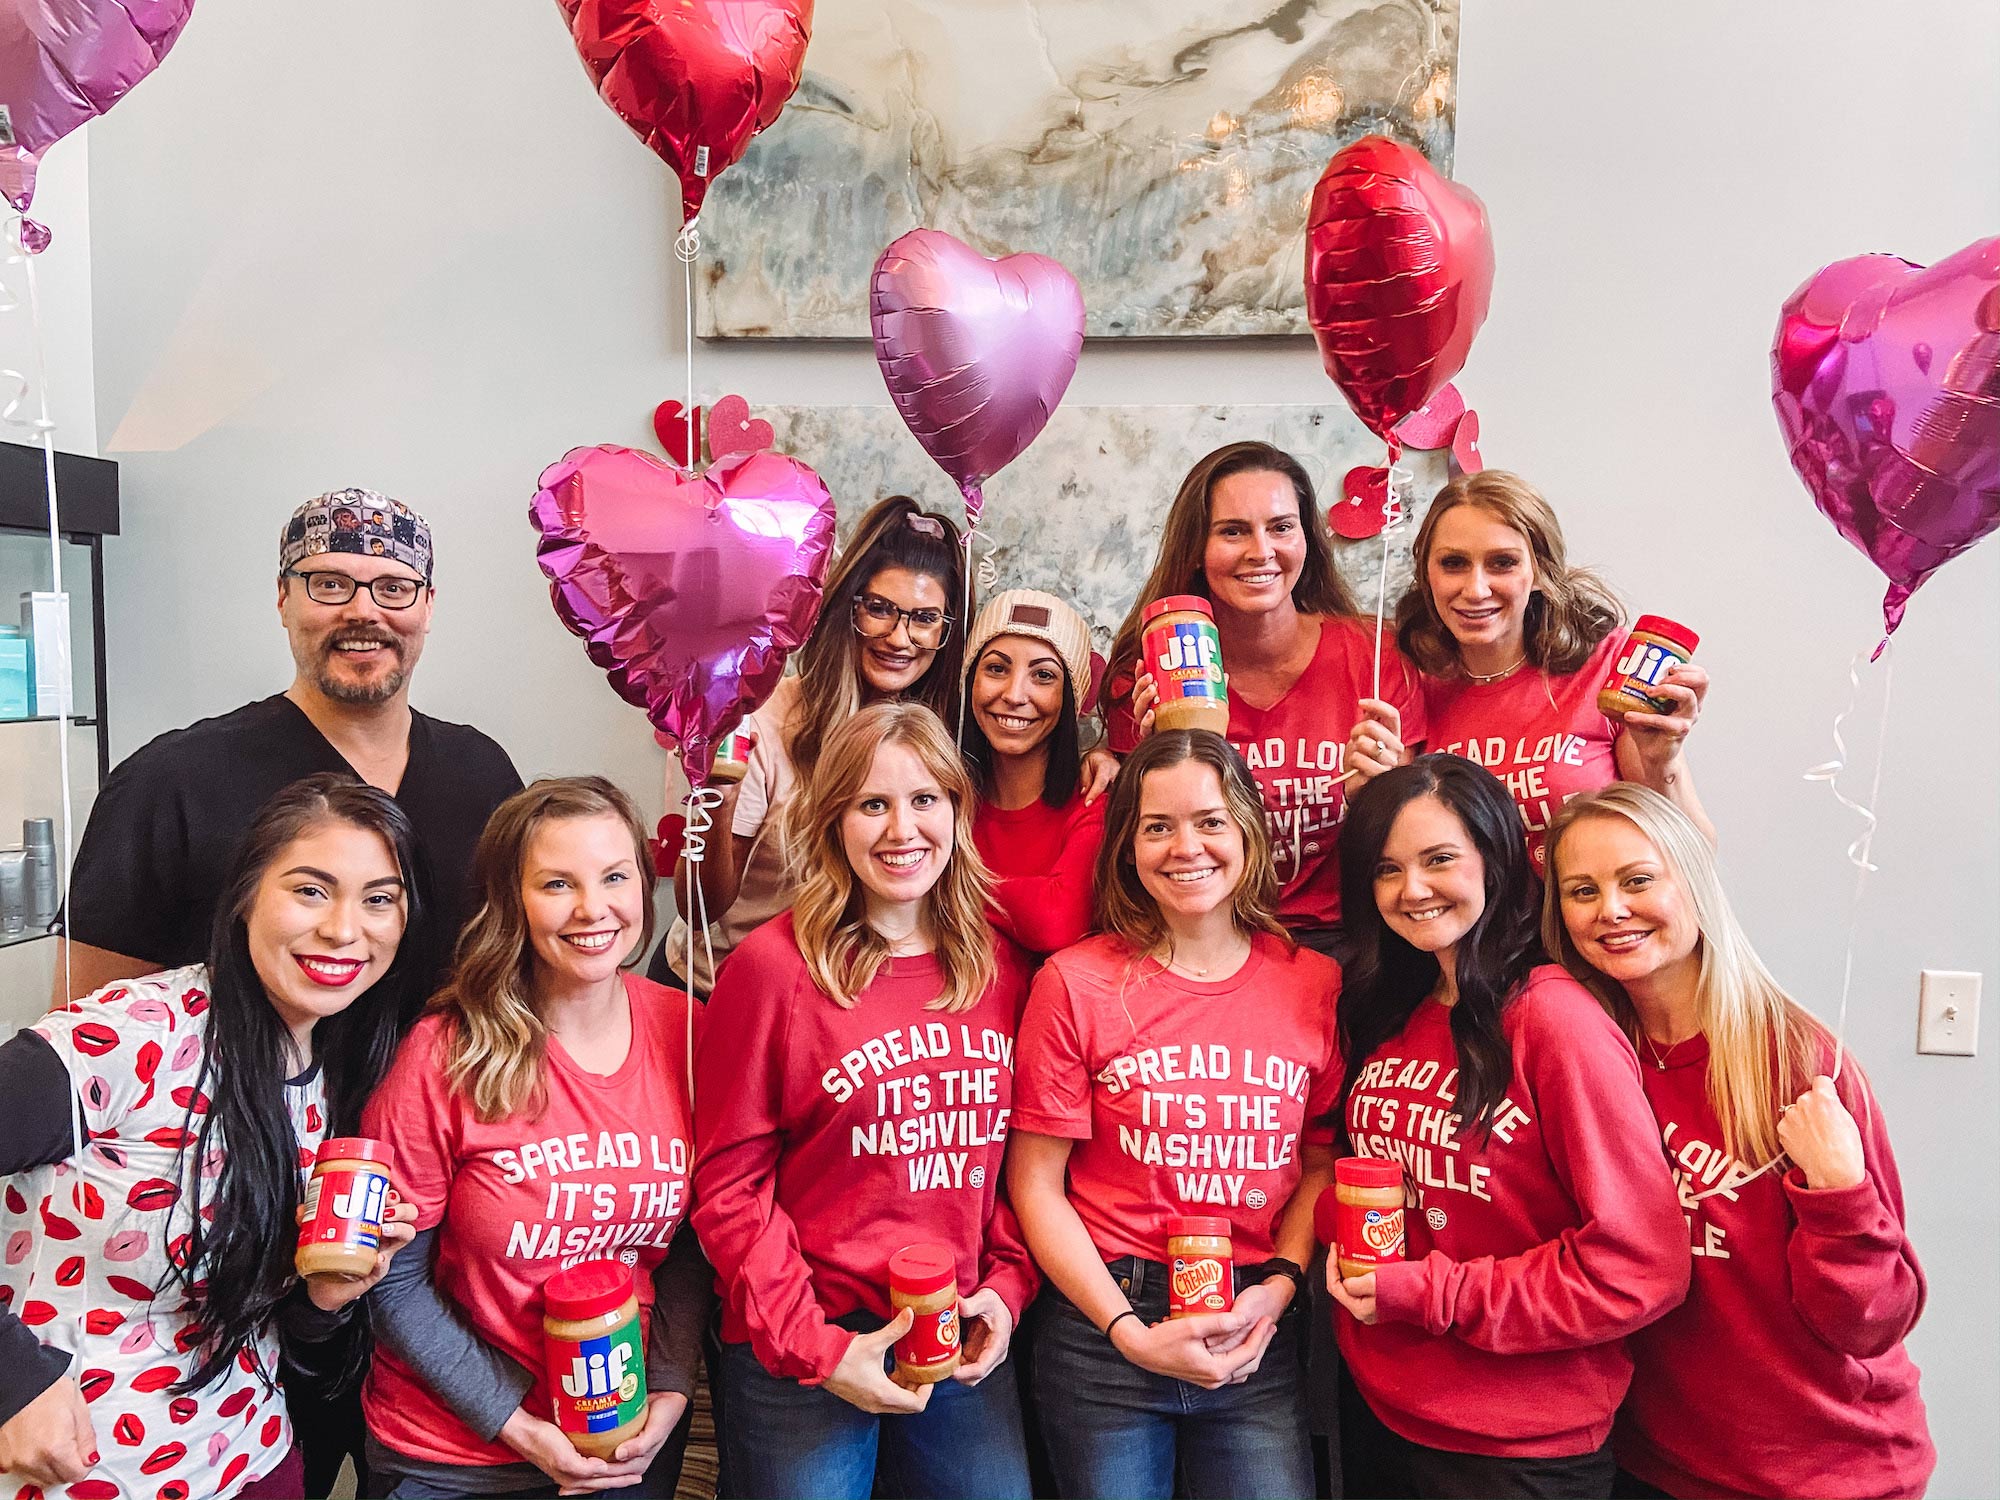 Team photo of Dr. J. J. Wendel Plastic Surgery wearing red t-shirts with pink and red balloons in the background